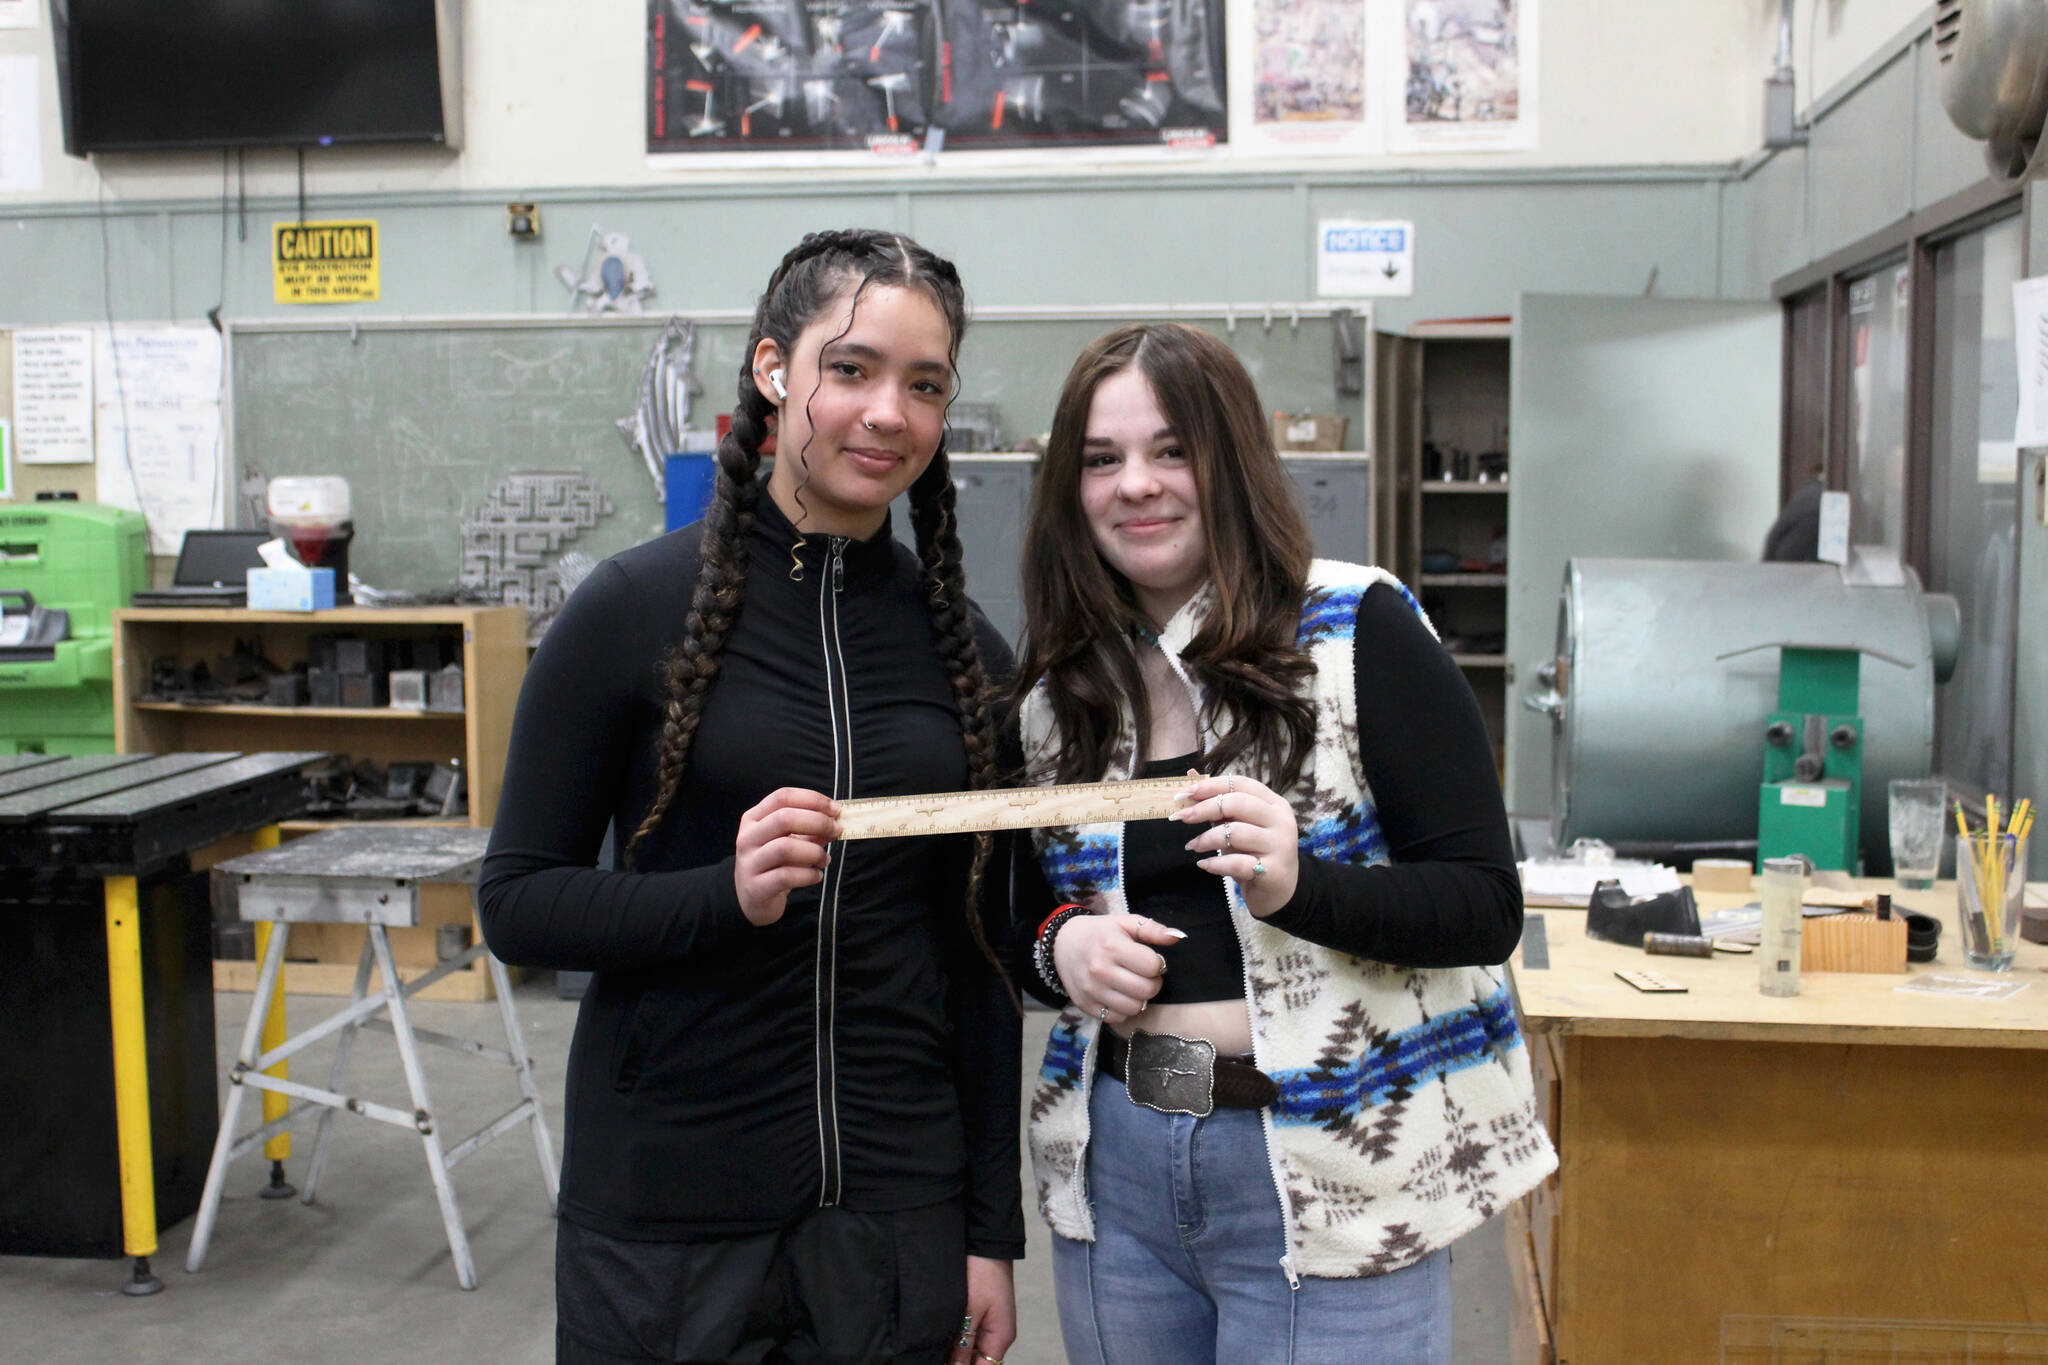 Kenai Central High School freshmen Franchesca Wingster (left) and Olivia McDonald (right) hold a ruler they created in a shop class on Wednesday, Feb. 22, 2023 in Kenai, Alaska (Ashlyn O’Hara/Peninsula Clarion)